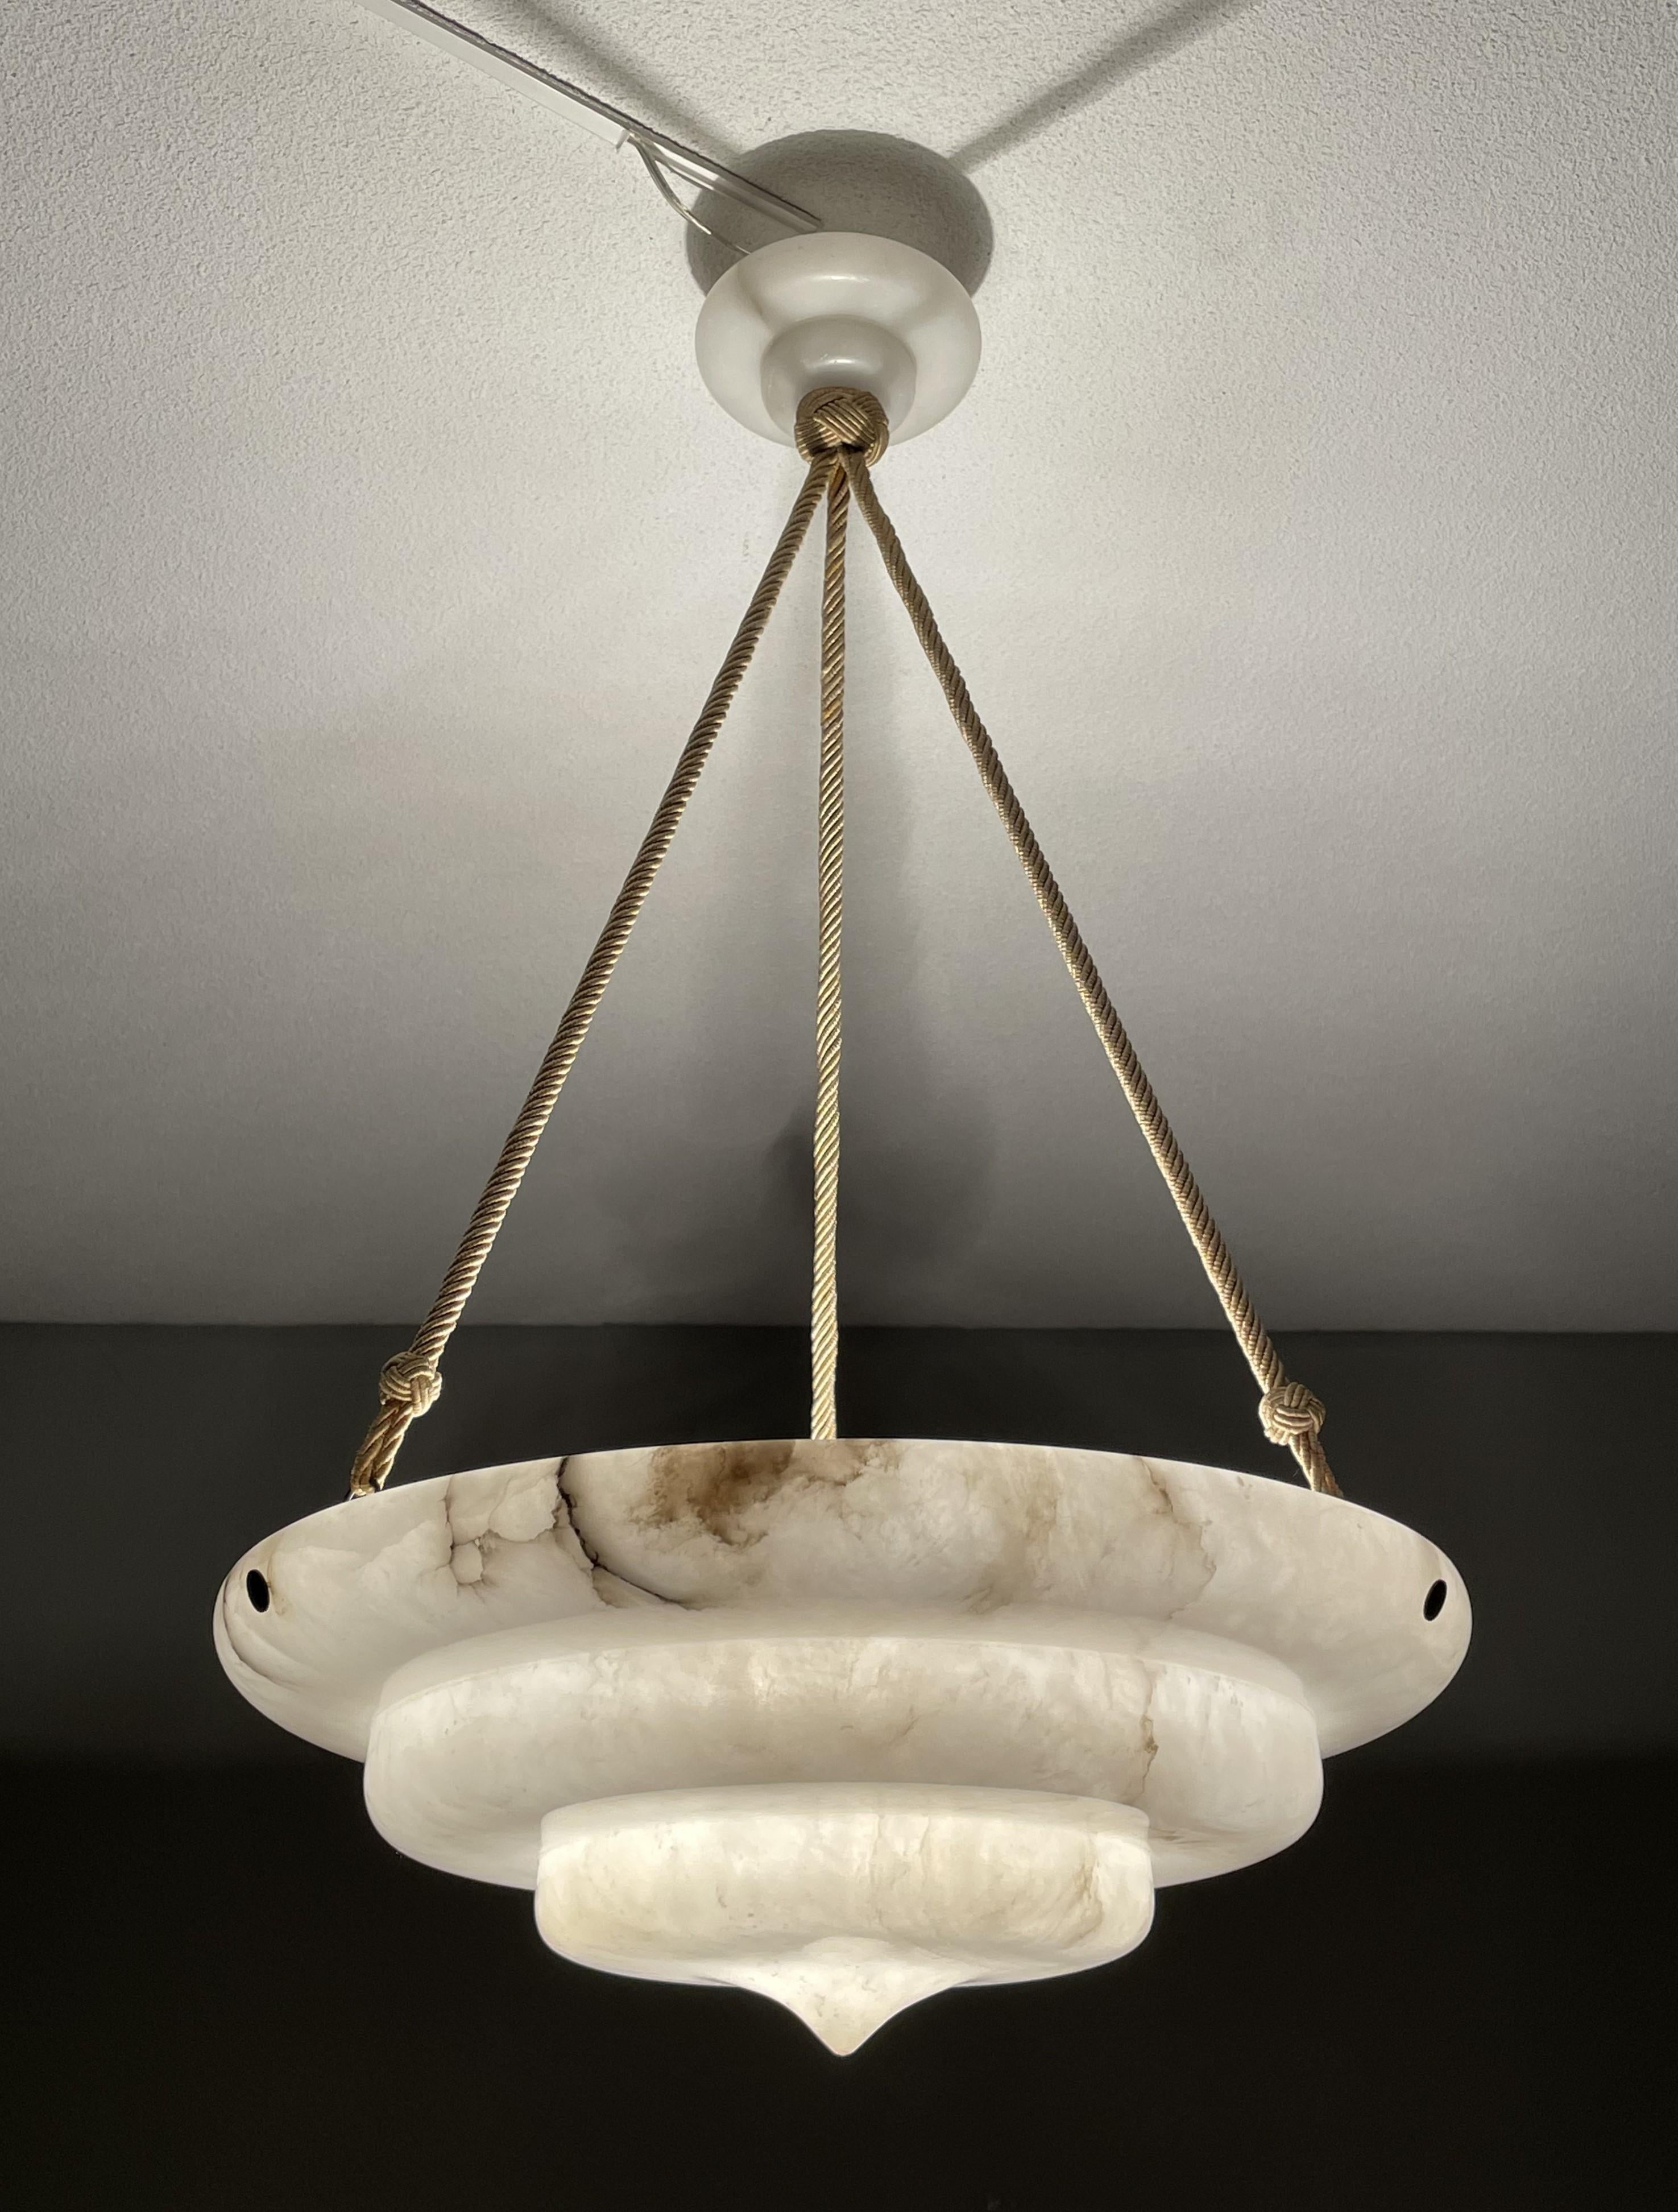 Stunning, geometrically circular Art Deco chandelier.

With early 20th century lighting as one of our specialities, we were thrilled to find another rare and truly beautiful Art Deco pendant, made of the most striking alabaster imaginable. The